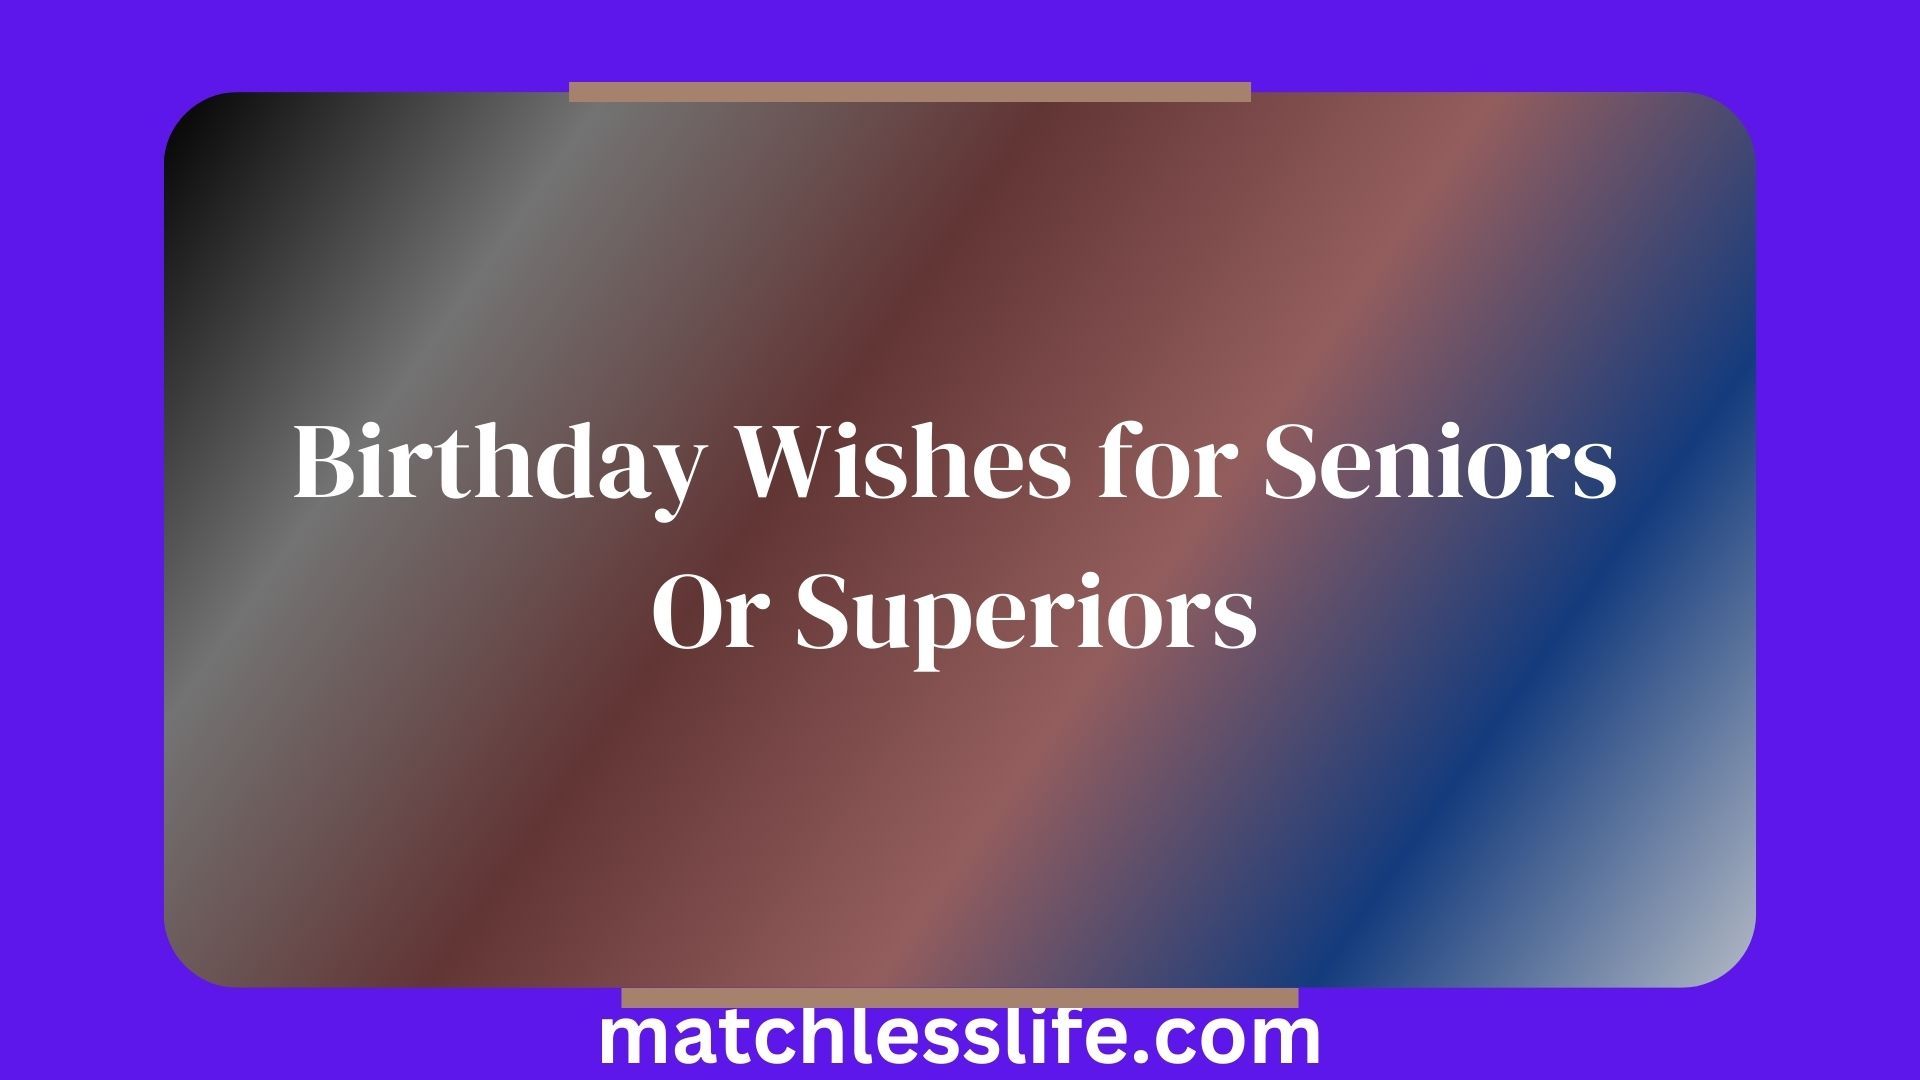 Birthday Wishes for Seniors Or Superiors